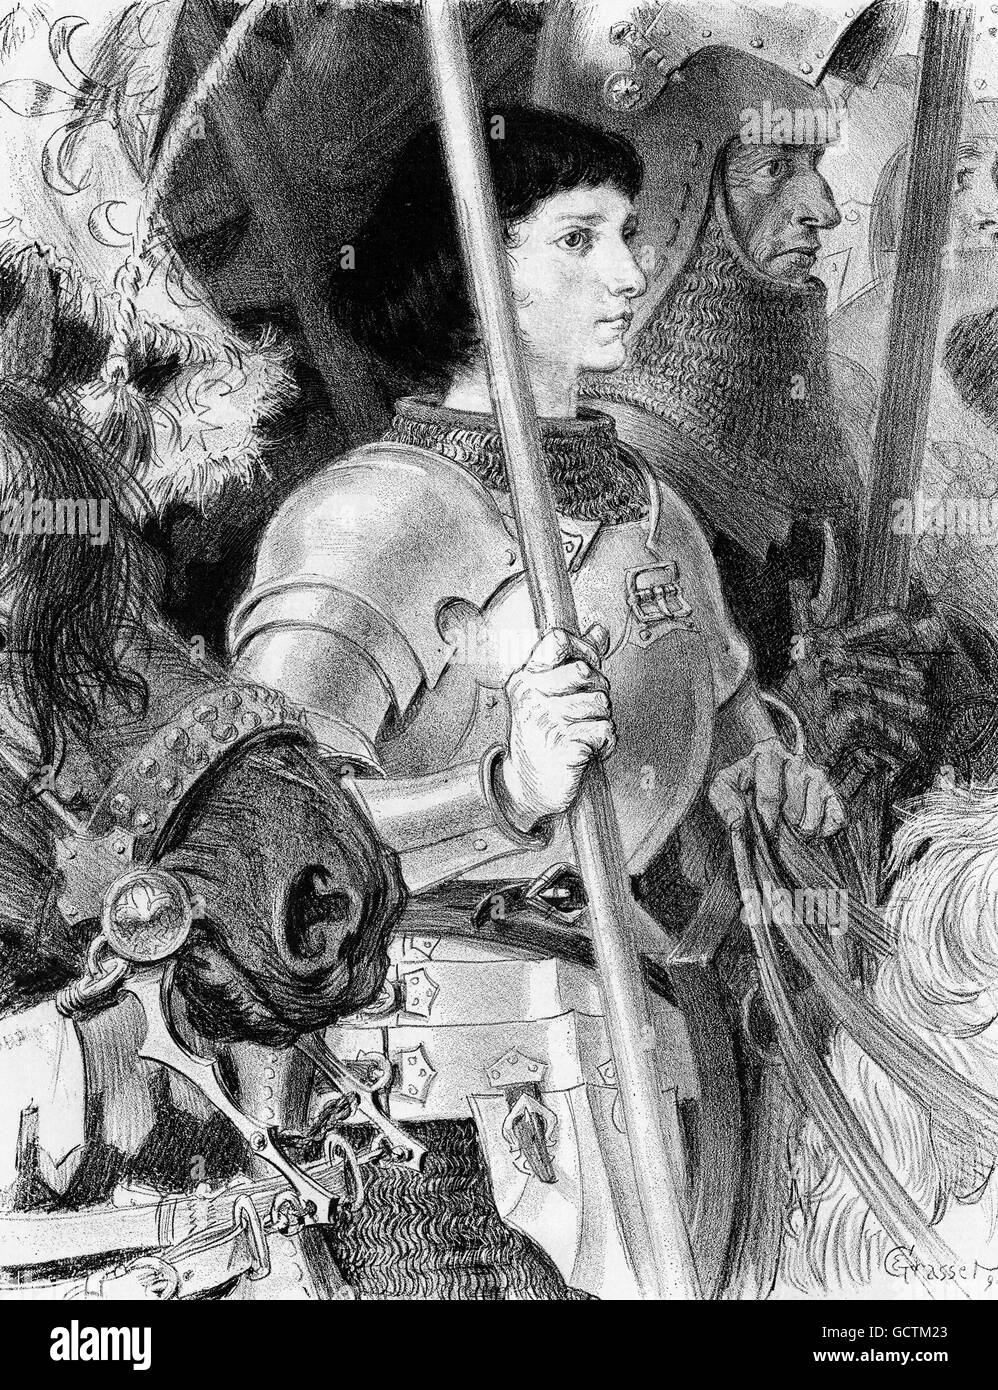 Joan of Arc (Jeanne d'Arc: c.1412-1431), often referred to as  the 'The Maid of Orléans'. Illustration by Eugene Grasset from a poster promoting Mark Twain's 'Joan of Arc'. Stock Photo